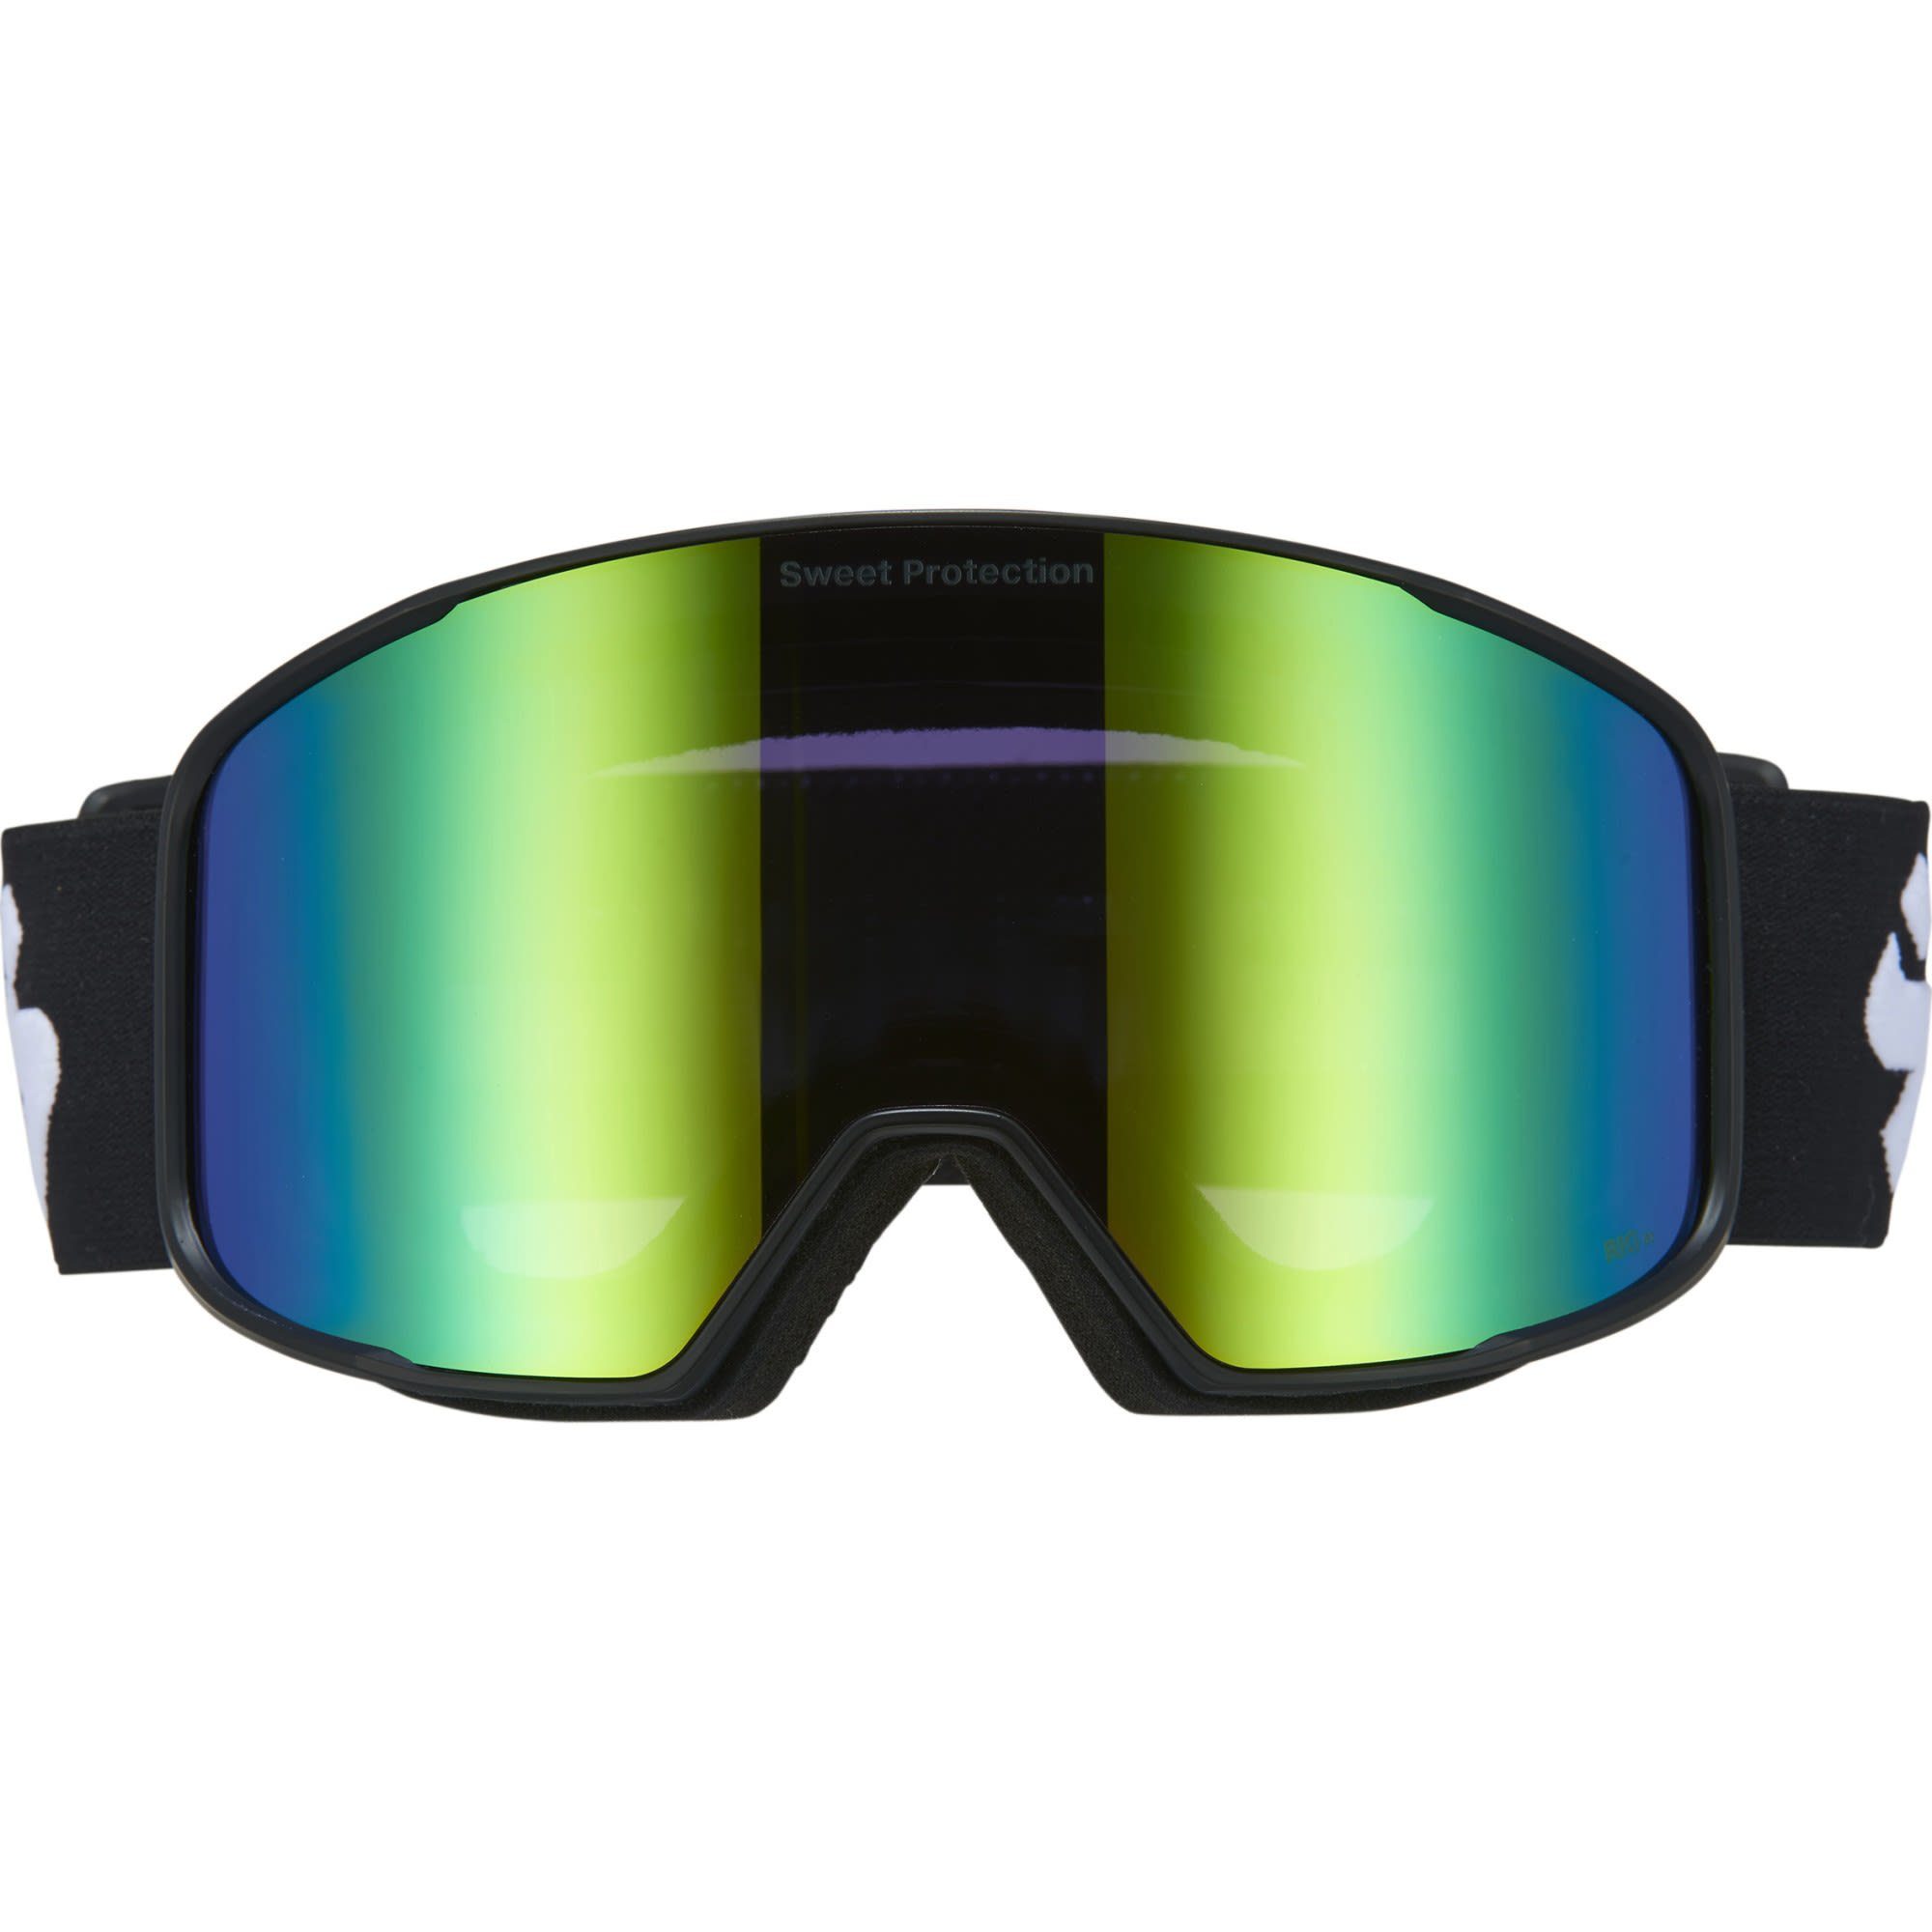 Sweet Lens Boondock Protection Protection Emerald Rig Skibrille Sweet Reflect RIG